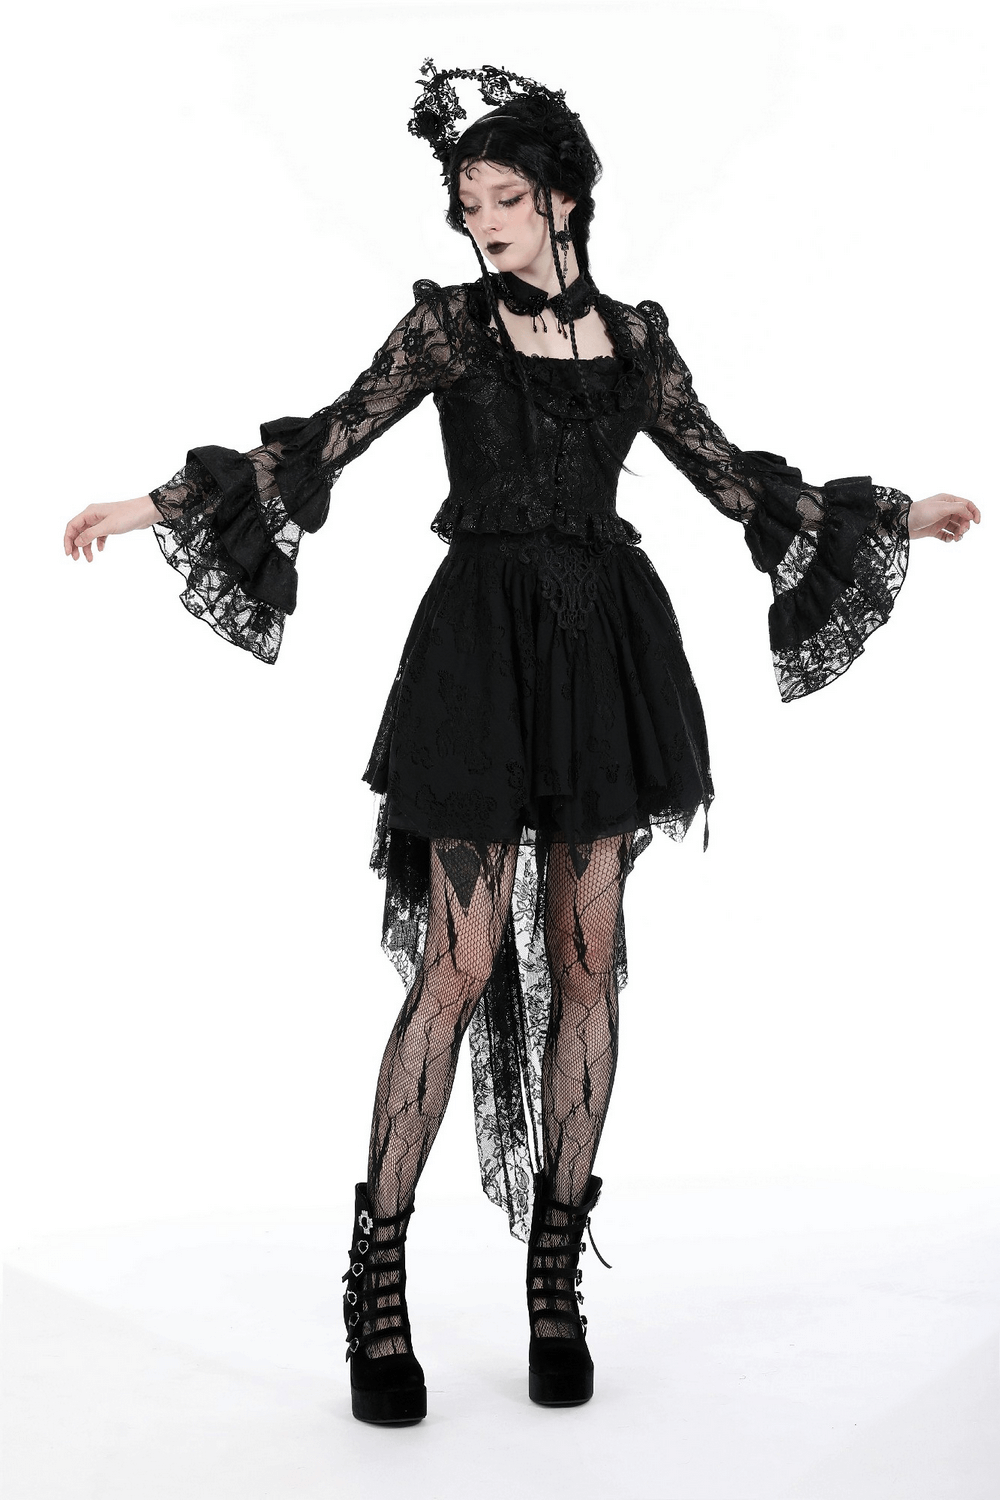 Sexy Black Lace Top with Elegant Bell Sleeves